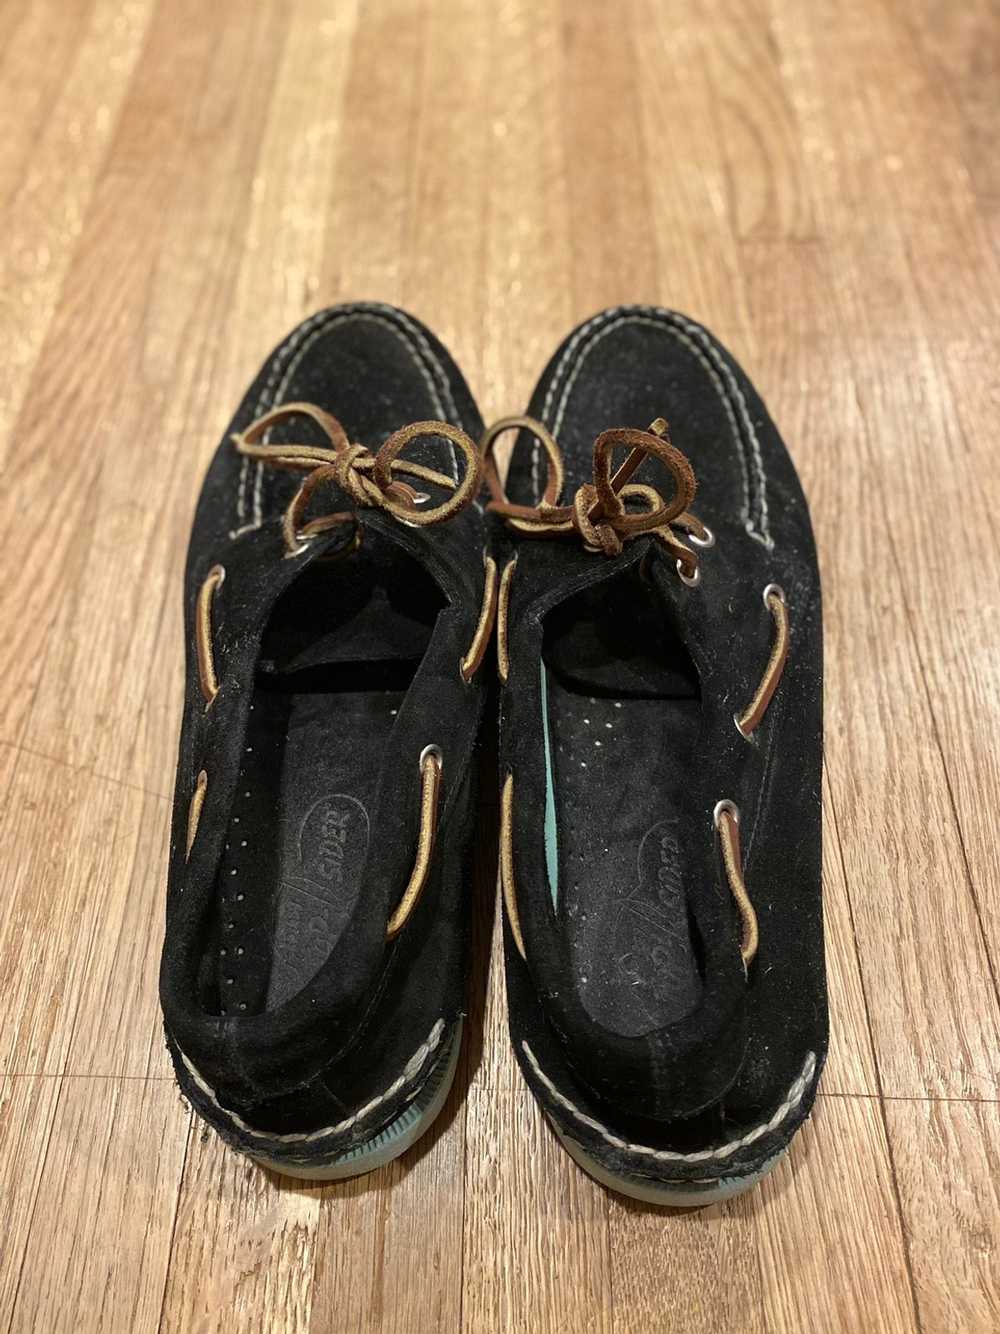 Sperry Top Siders - image 4